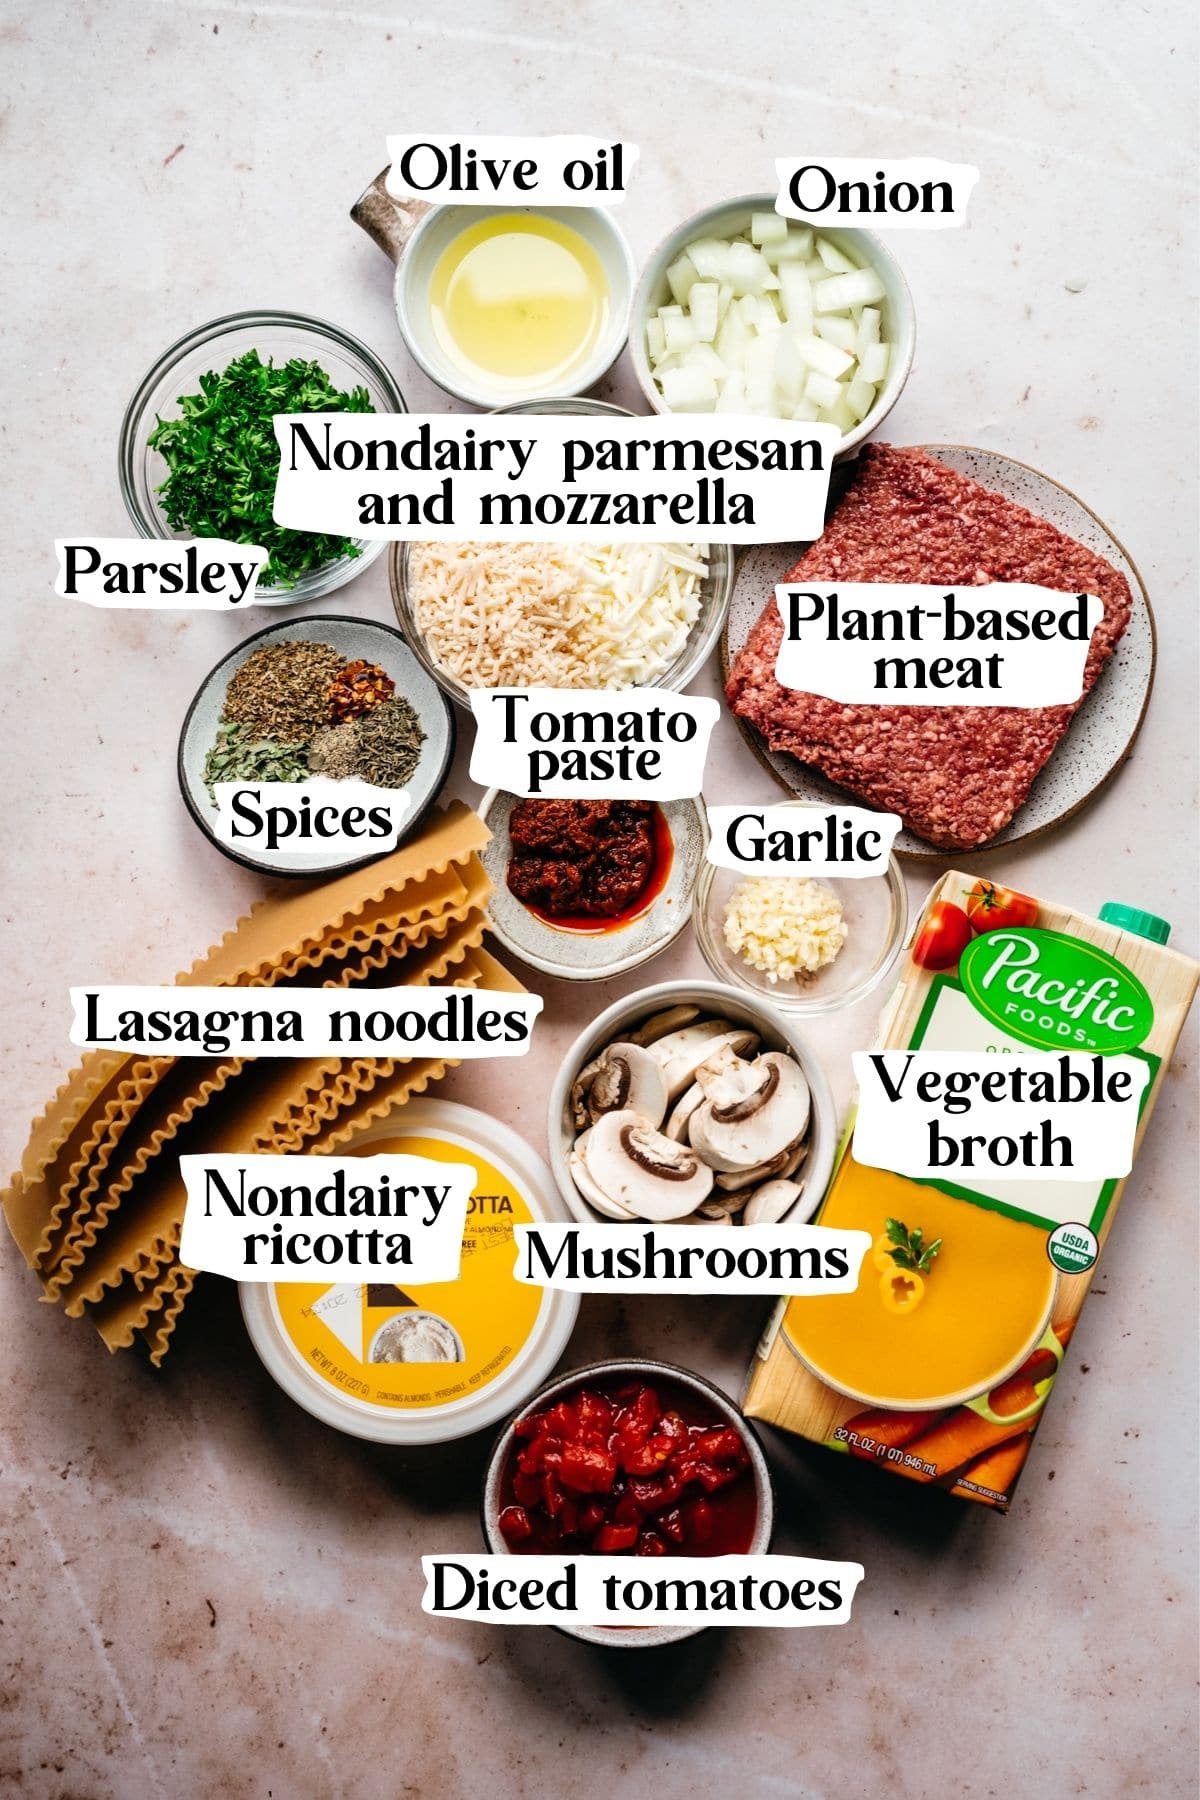 Overhead view of lasagna soup ingredients, including vegetable broth and plant-based meat.